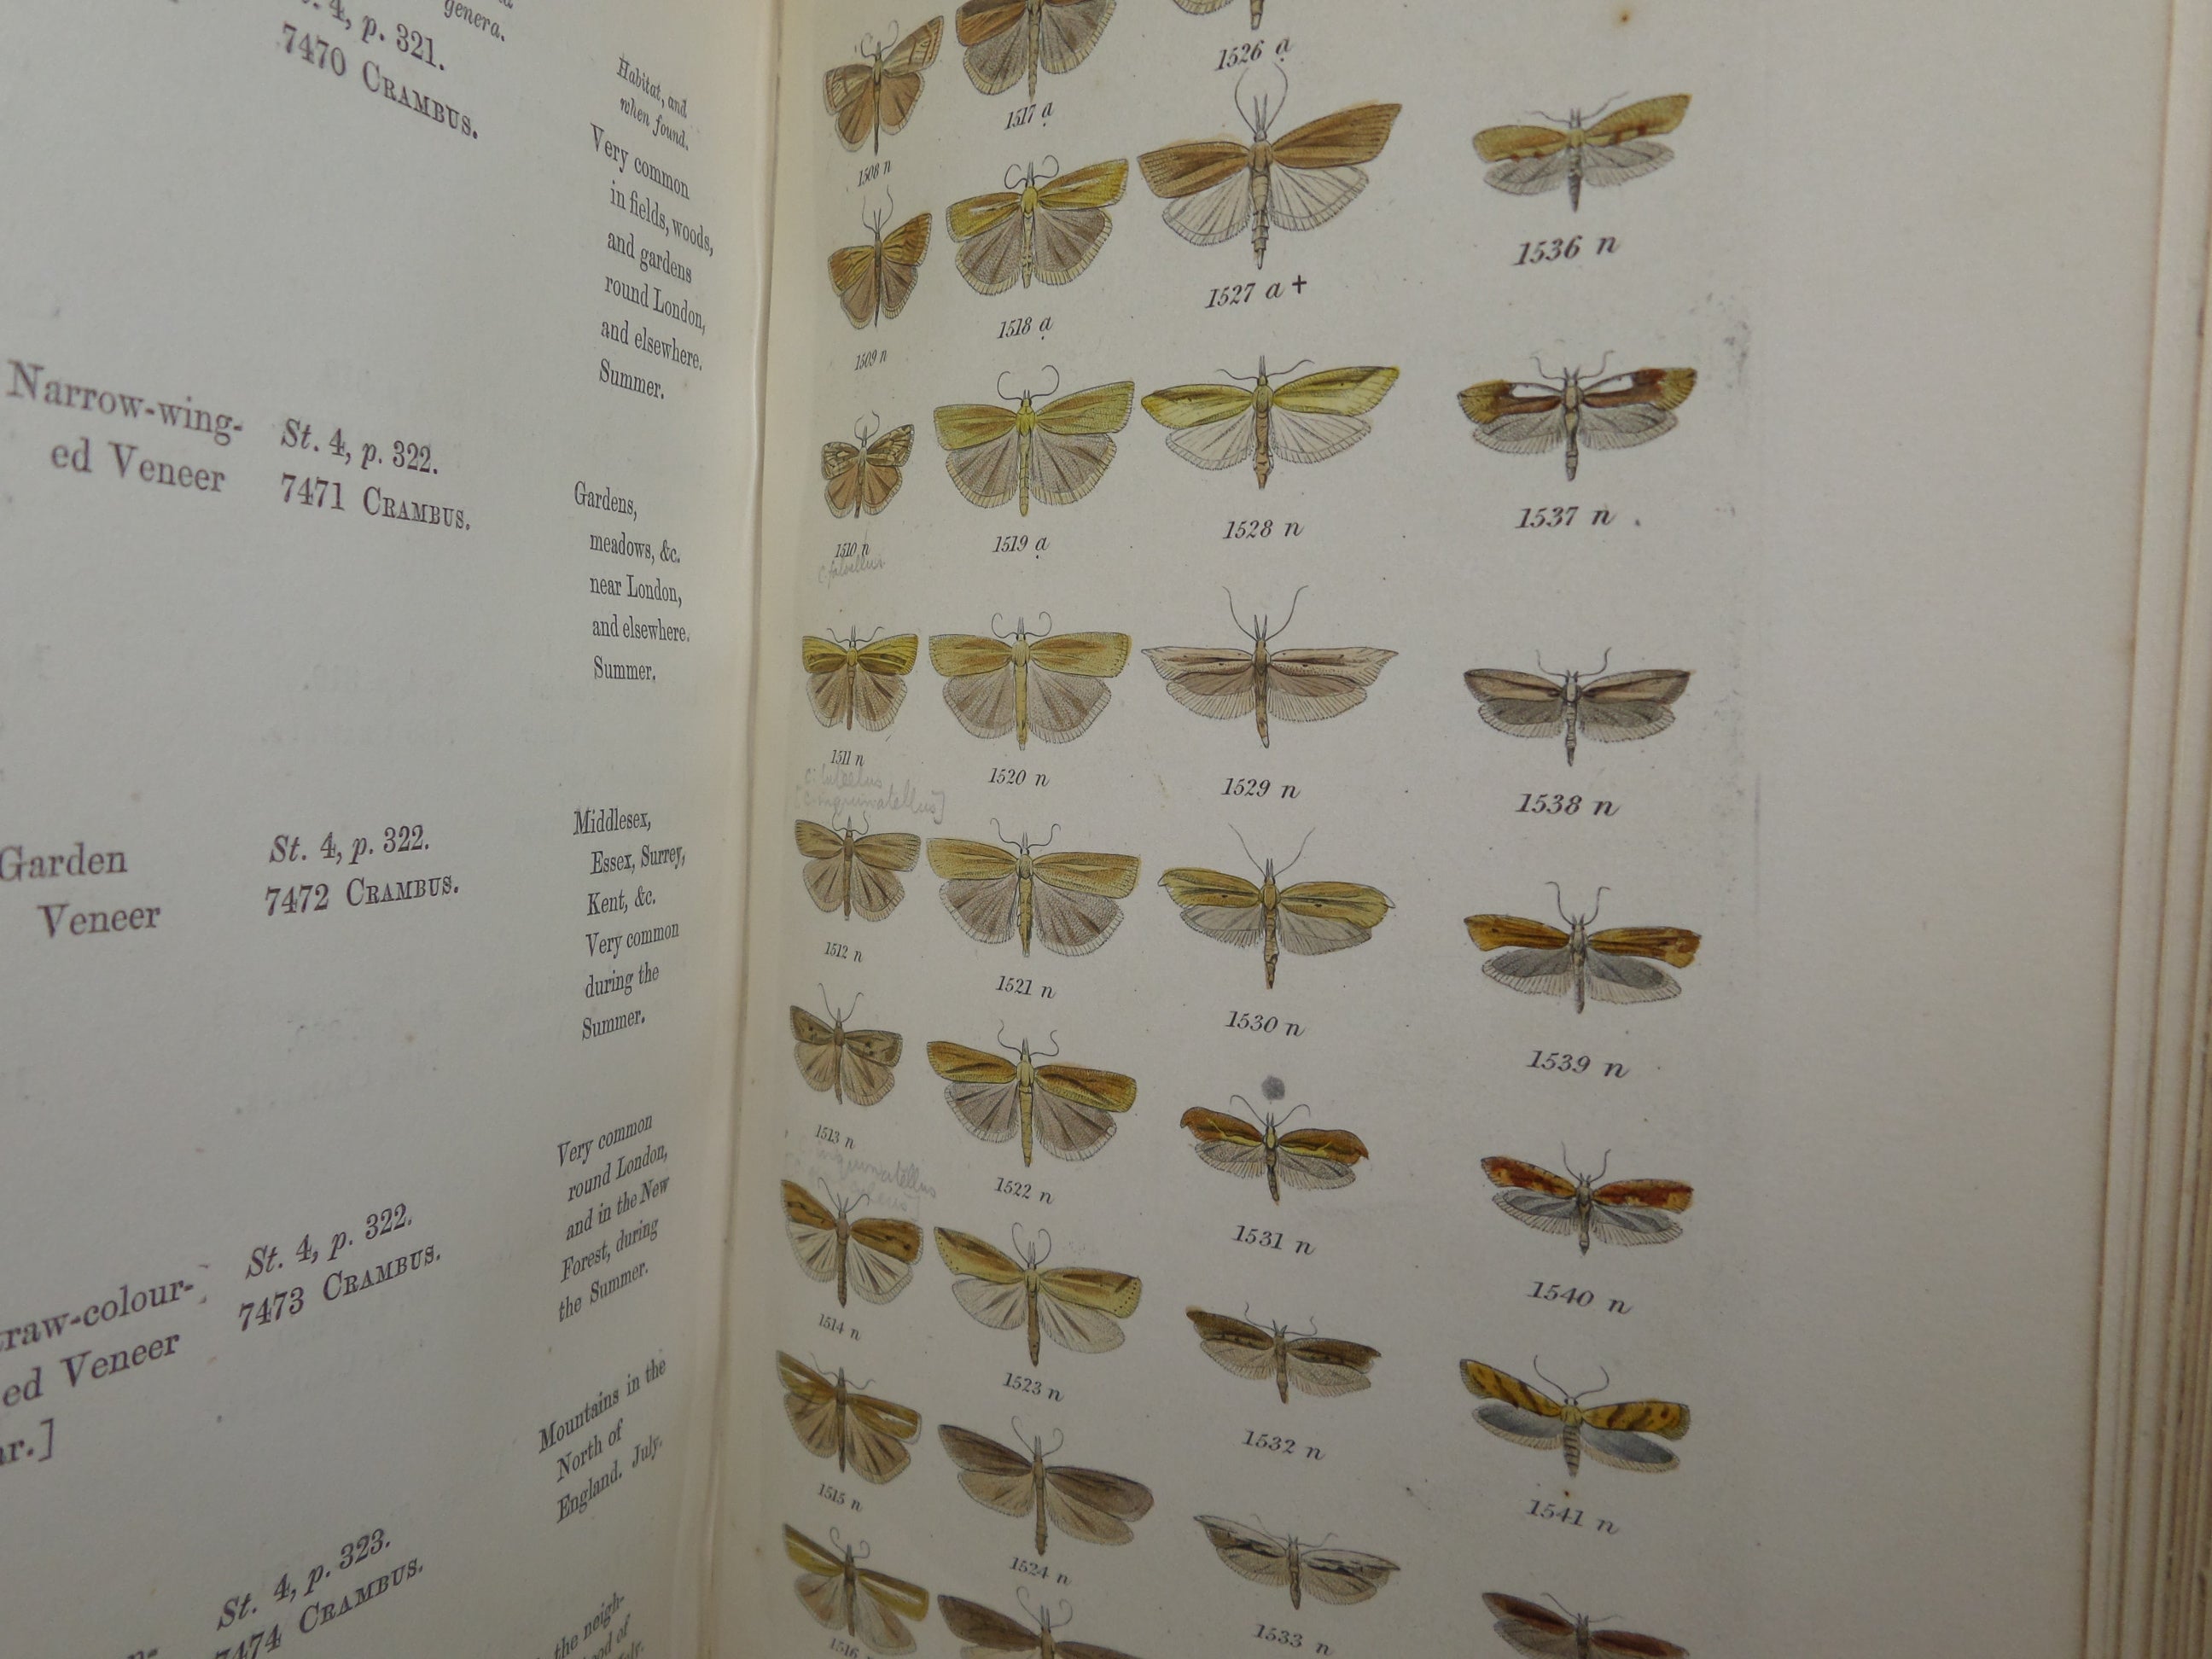 INDEX ENTOMOLOGICUS; A COMPLETE ILLUSTRATED CATALOGUE OF THE LEPIDOPTEROUS 1854